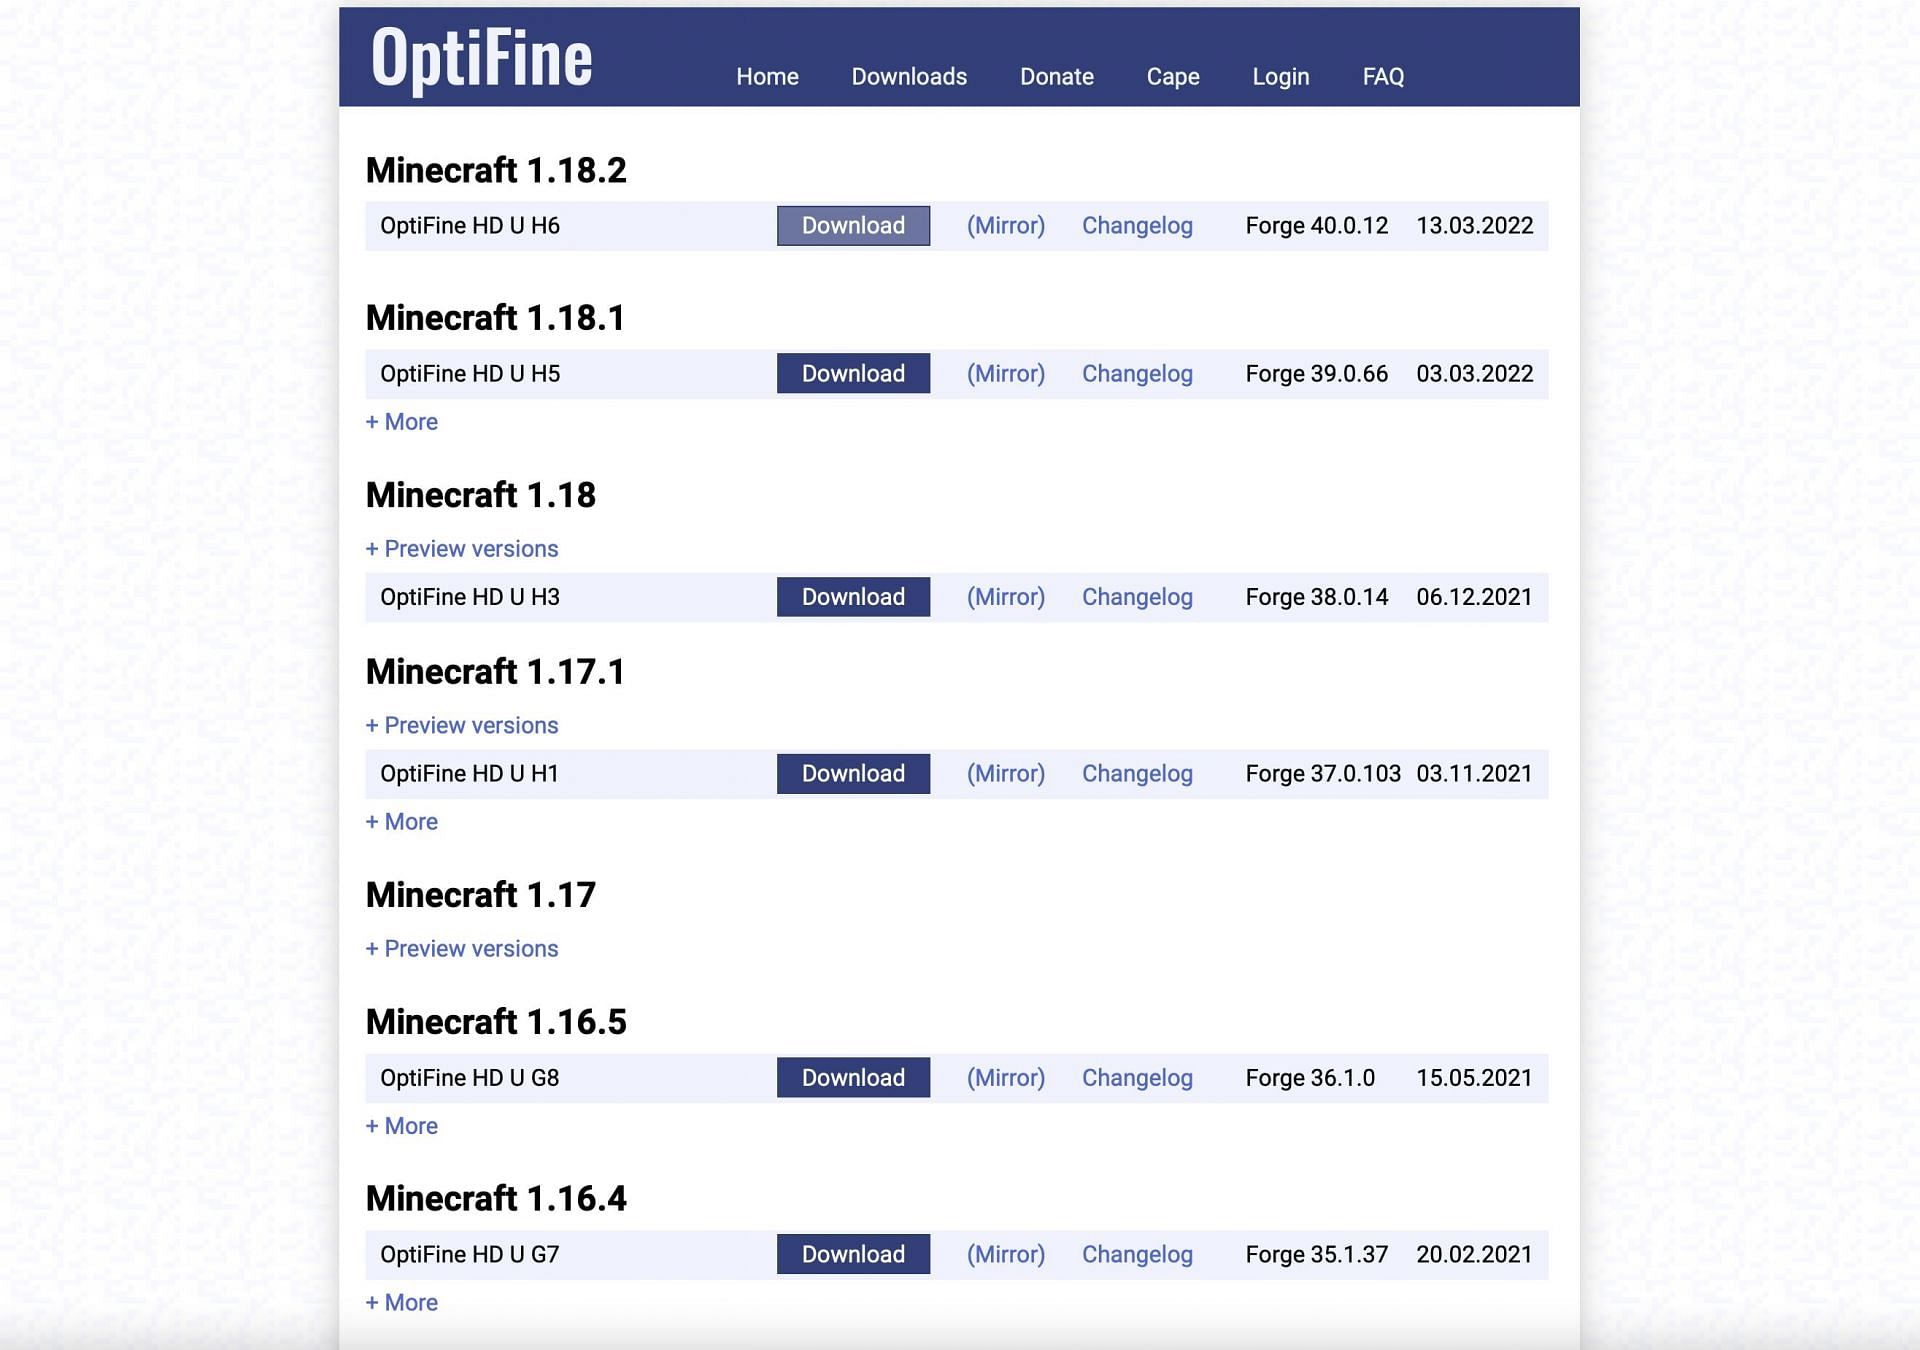 How to Install OptiFine in Minecraft 1.18.1 in 2022 [Guide]